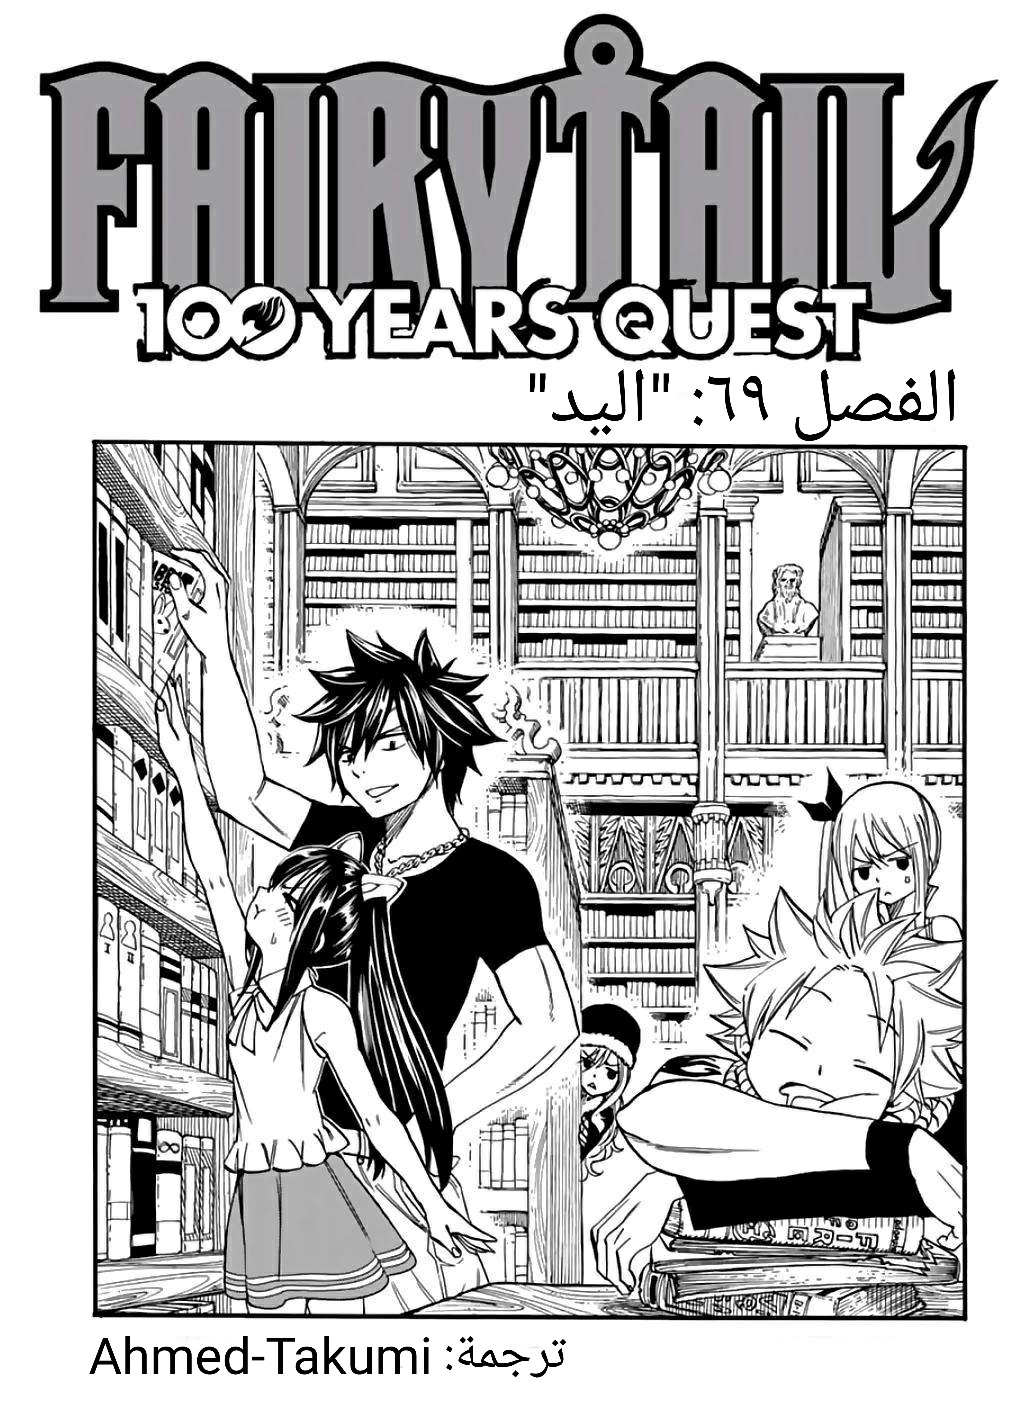 Fairy Tail 100 Years Quest: Chapter 69 - Page 1